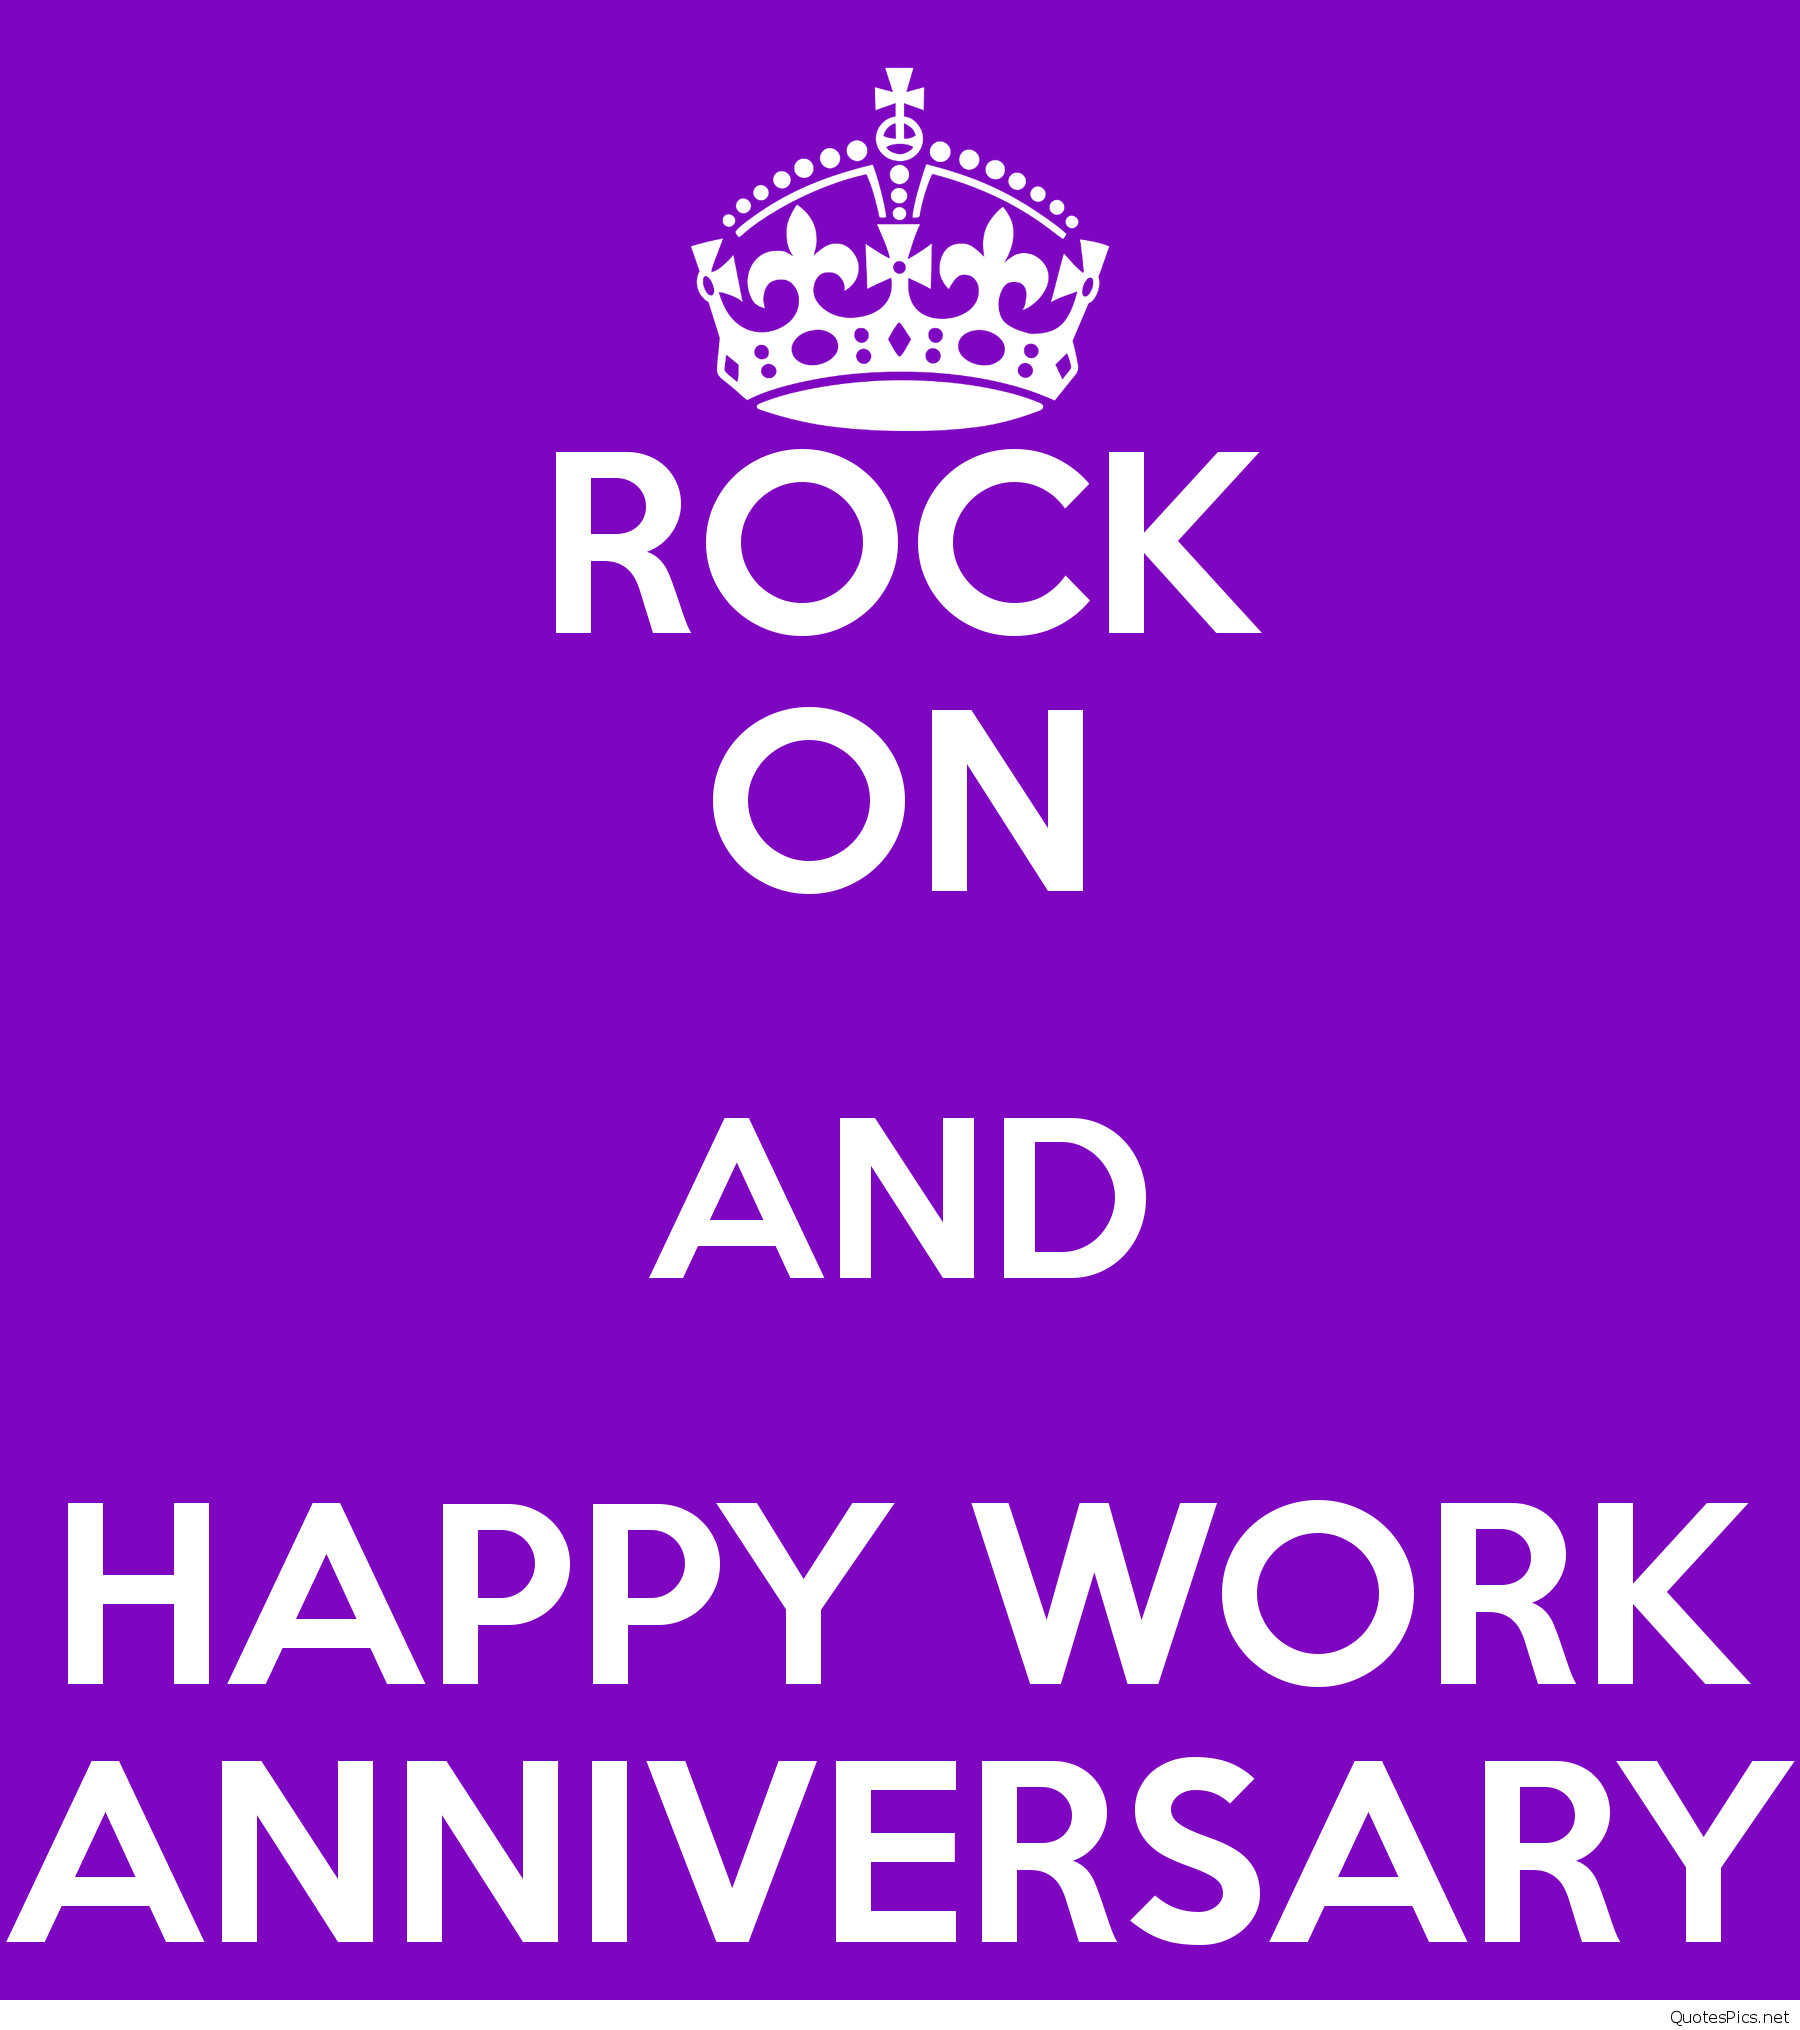 Happy Work Anniversary Quotes
 Happy office work anniversary images quotes sayings cartoons